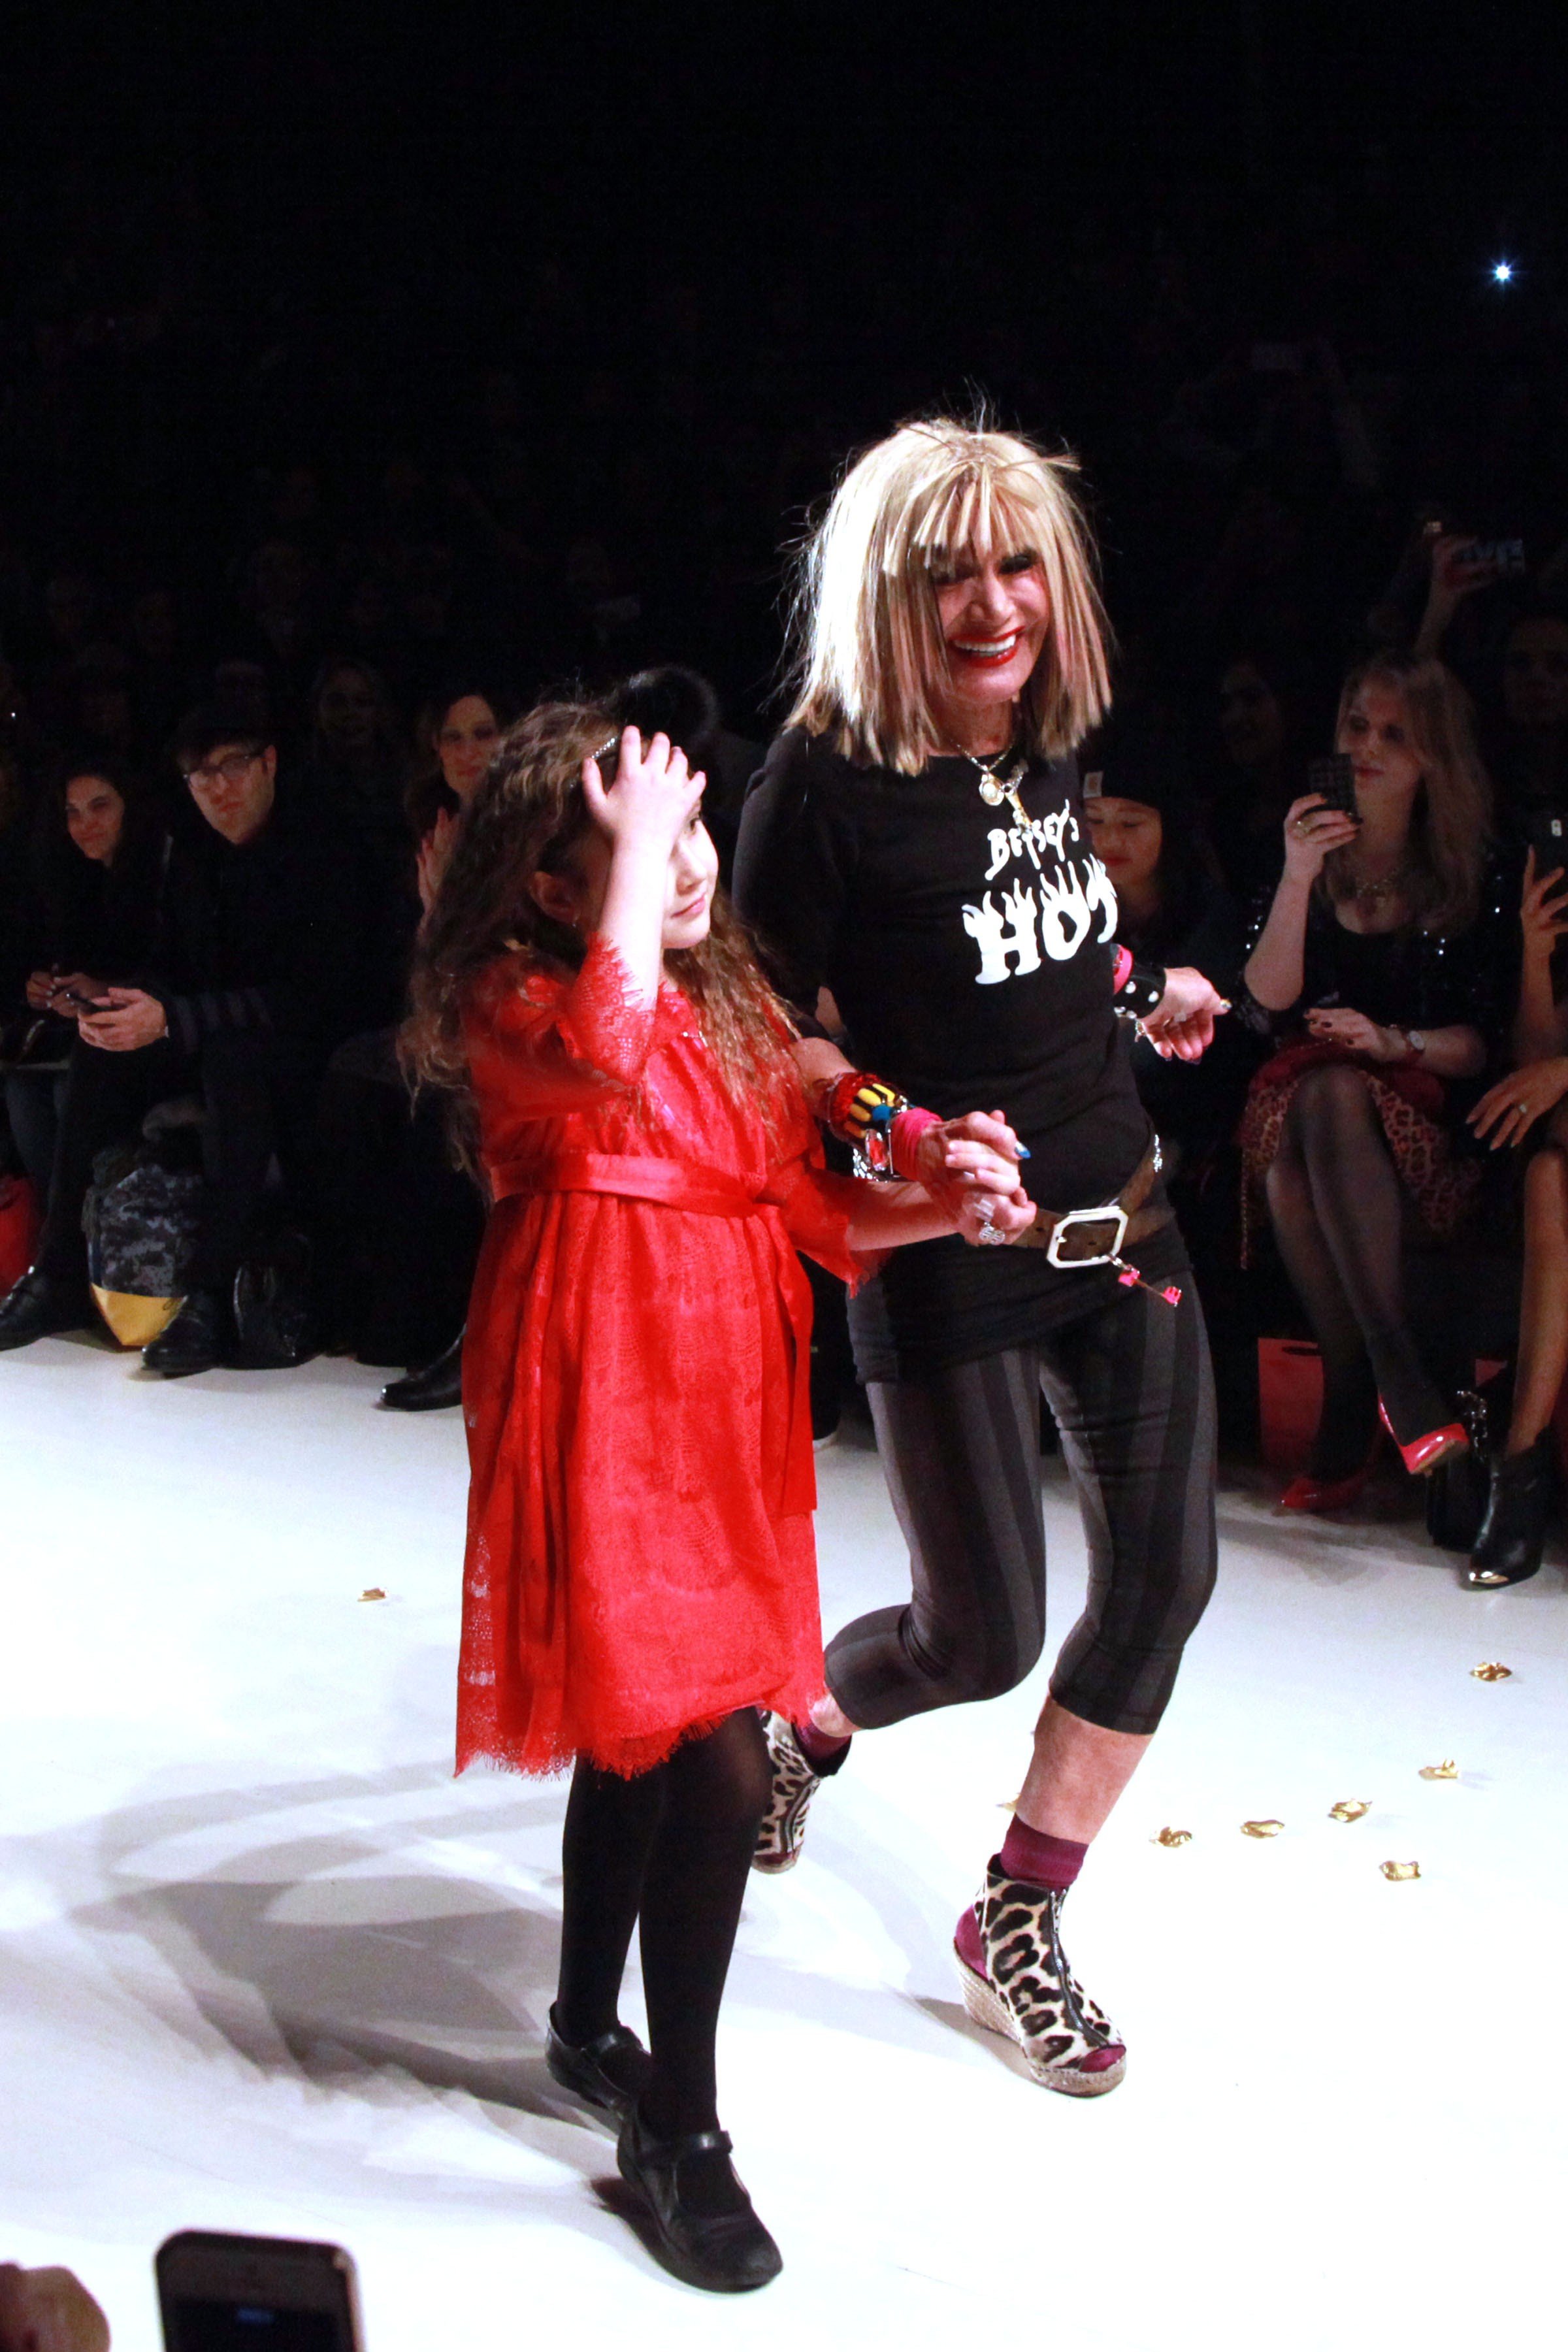 Betsey Johnson walks the catwalk with granddaughter Ella during the finale of her show. ©Patrick McMullan J.Grassi/PatrickMcMullan.com